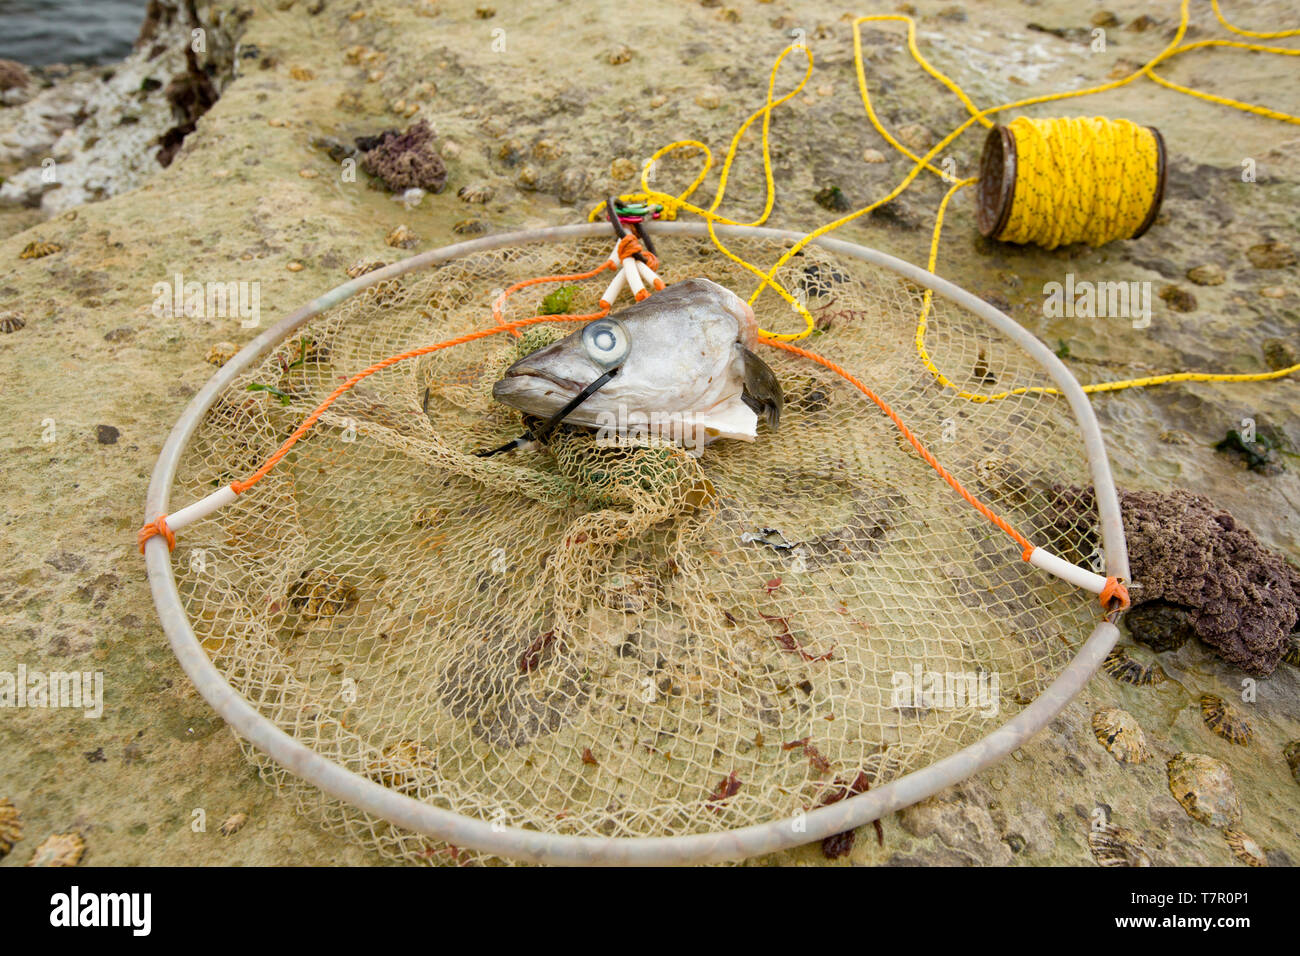 A drop net and chord, baited with a pollack’s head, Pollachius pollachius, that is intended for catching edible crabs. It is dropped into a likely spo Stock Photo